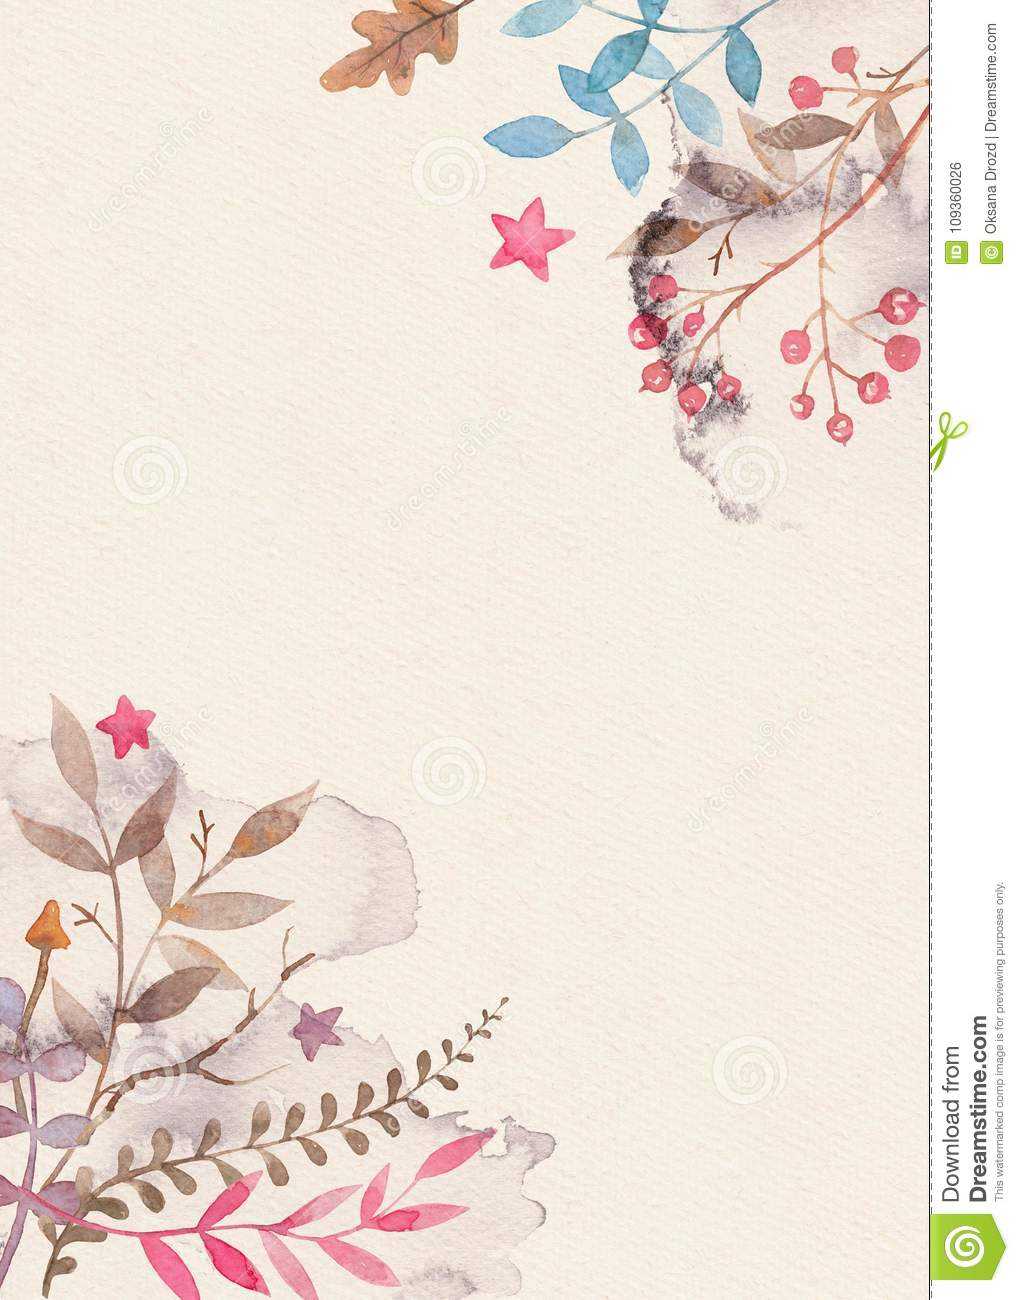 Hand Drawn Watercolor Greeting Card Template With Floral Inside Greeting Card Layout Templates